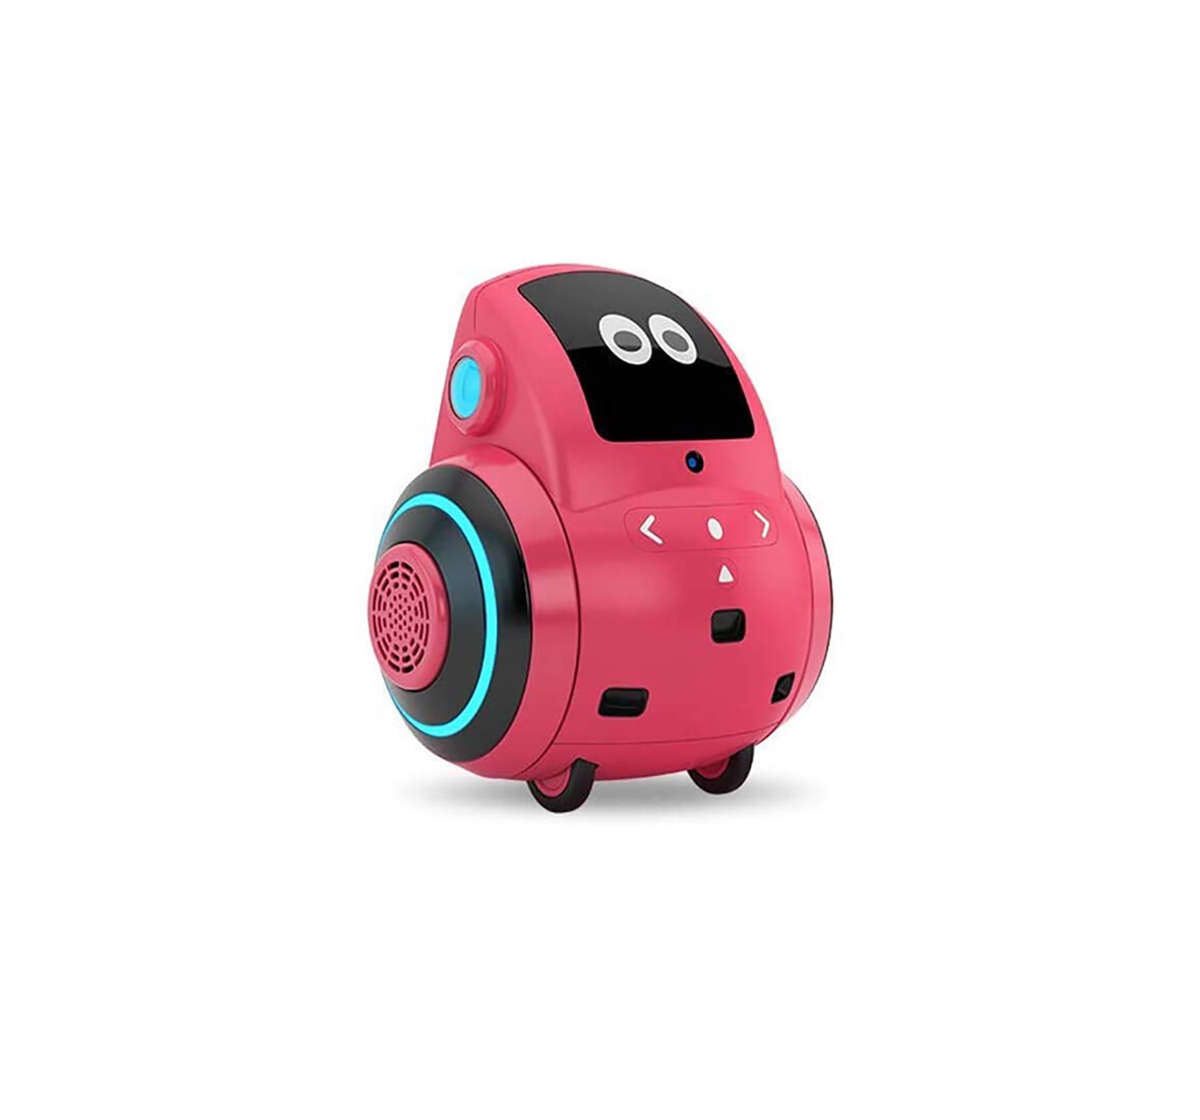 Miko | Miko 2 My Companion Robot - Red Robotics for Kids age 5Y+ (Red)